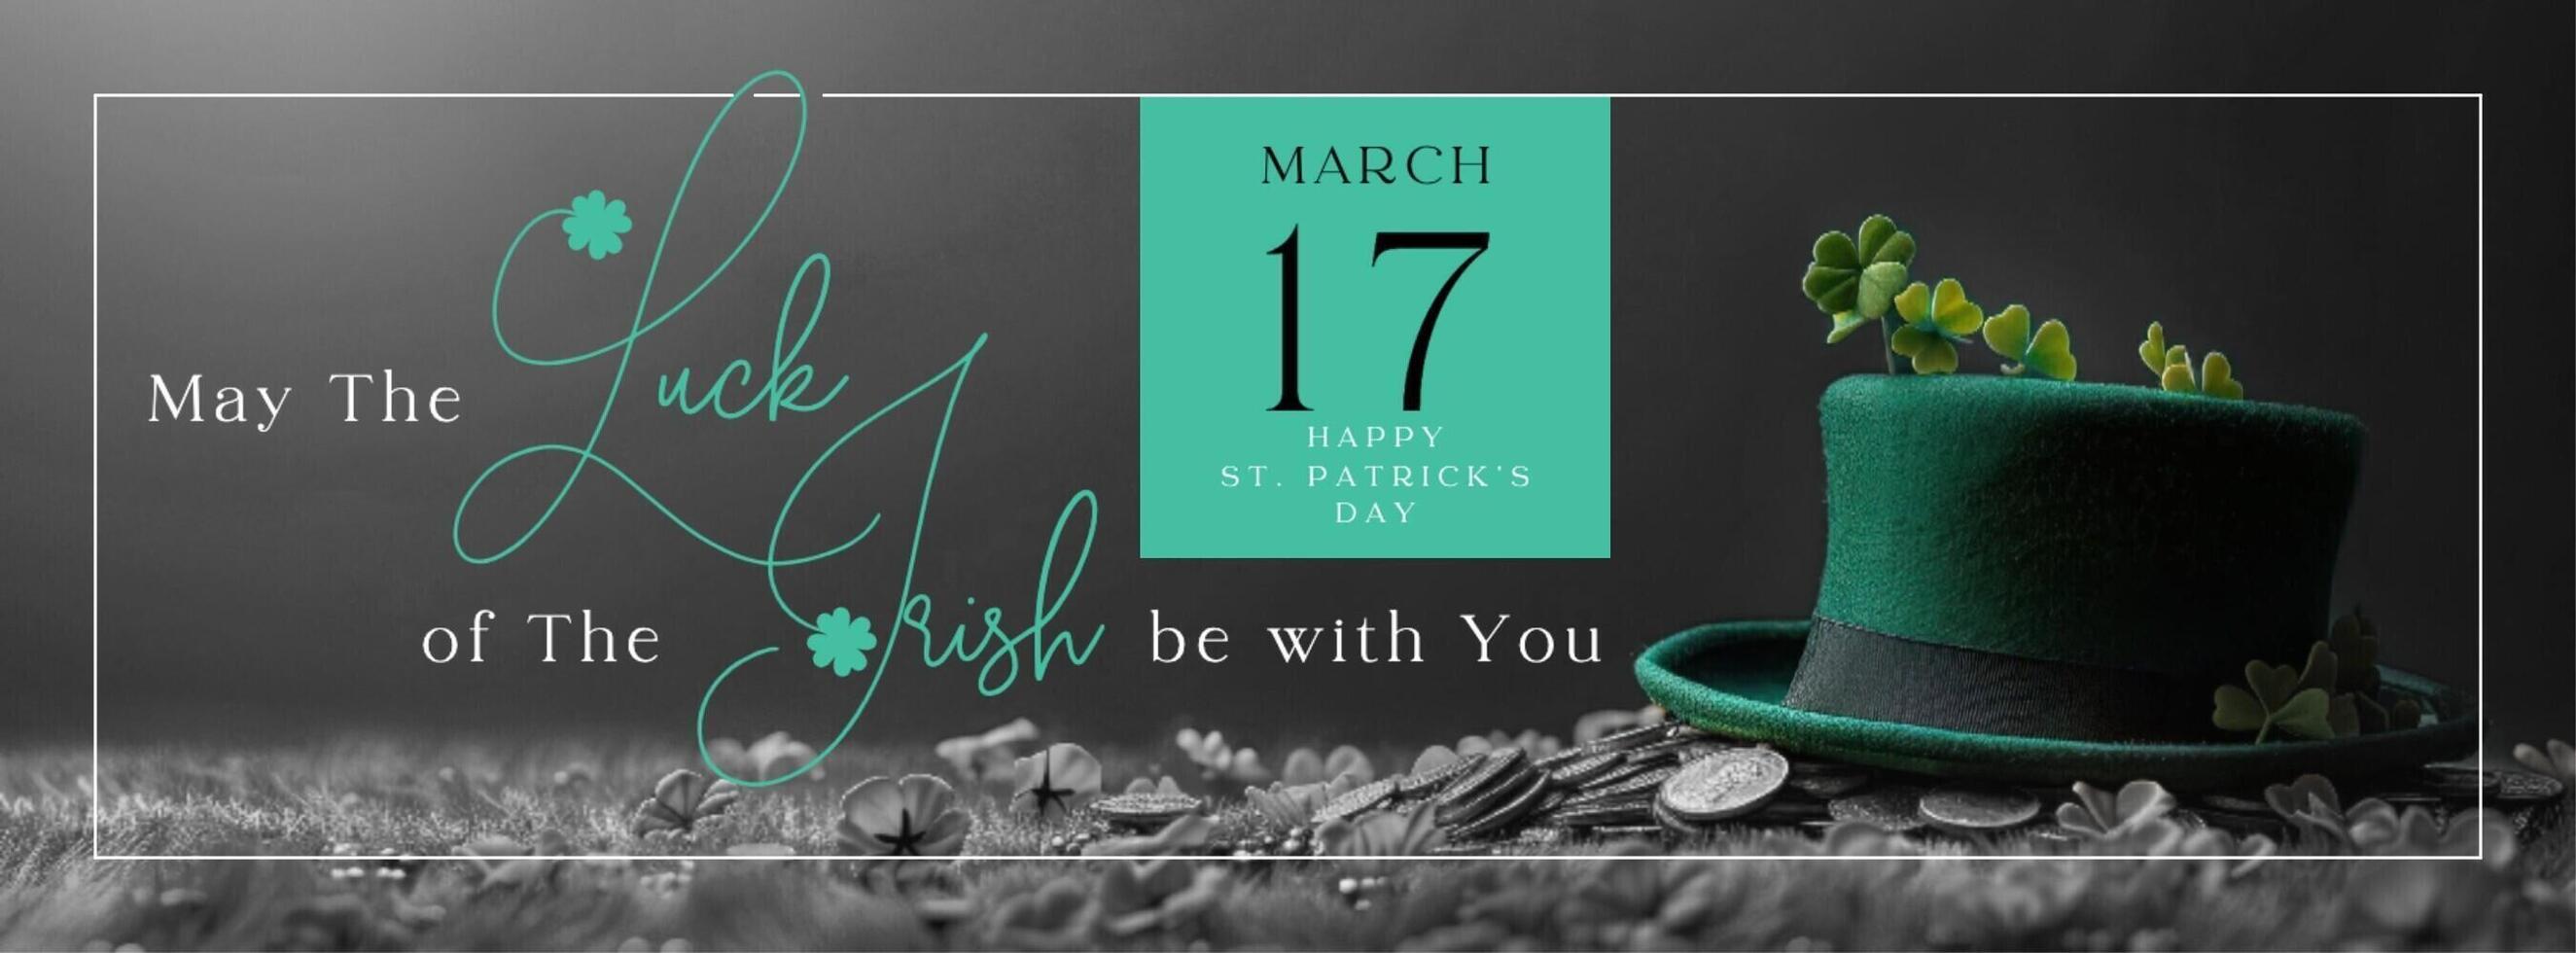 May The Luck Of The Irish Be With You Greeting with Leprechaun Hat for Facebook Cover template